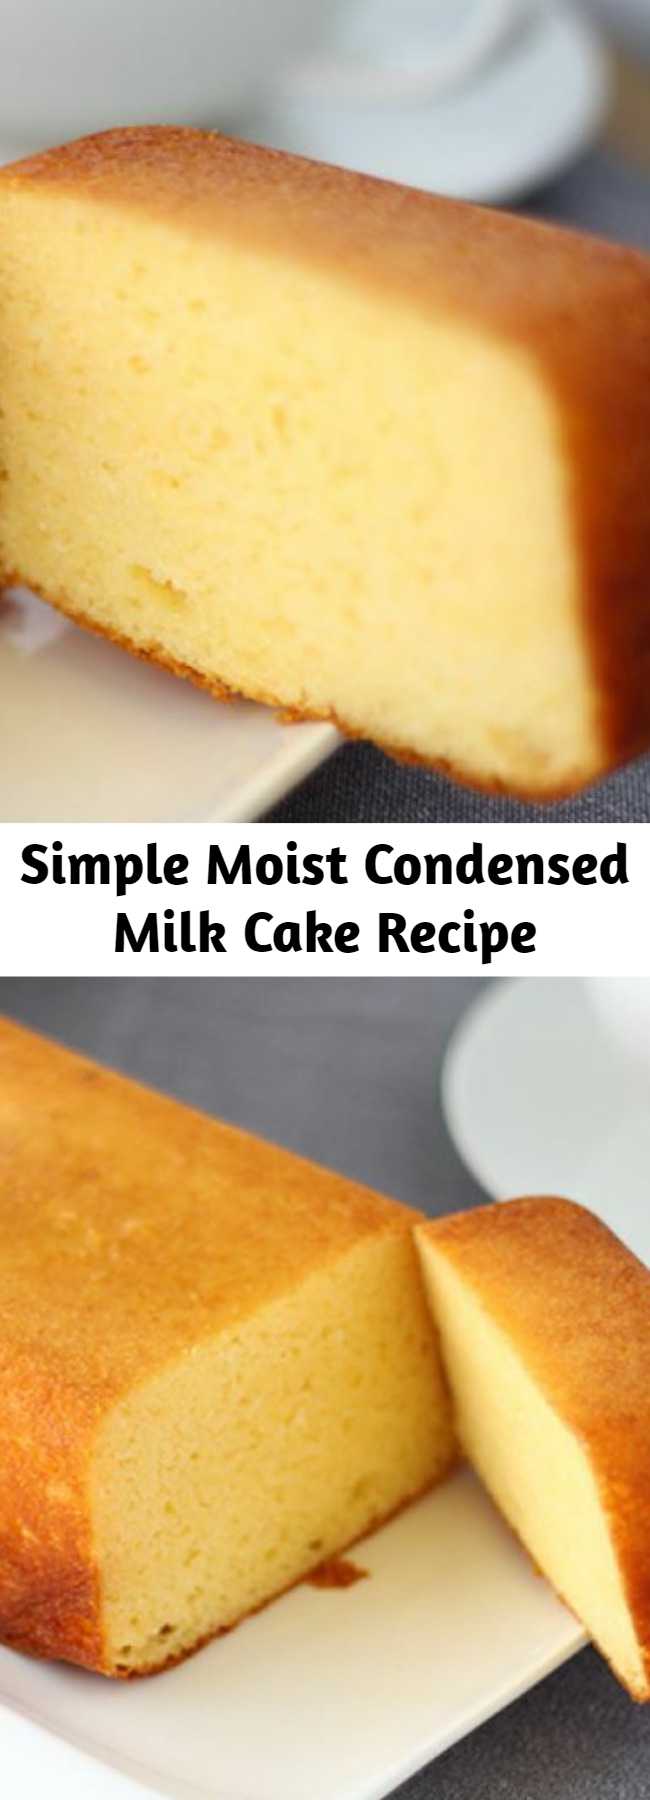 Simple Moist Condensed Milk Cake Recipe - A simple and moist cake to enjoy a nice snack all day long!